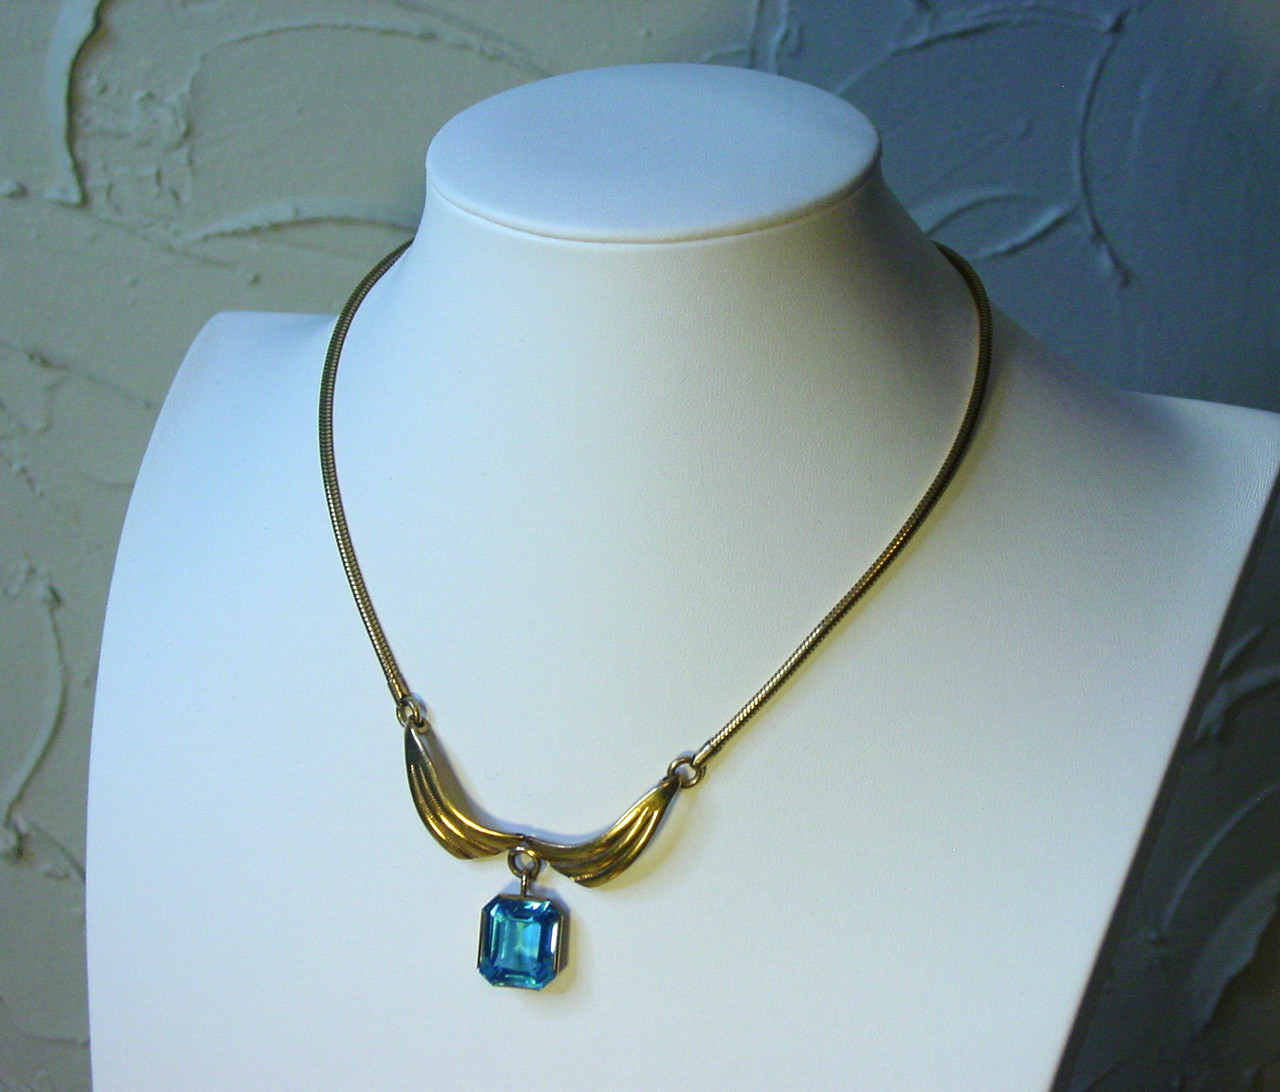 Simmons Glass Stone Necklace from the 1940's